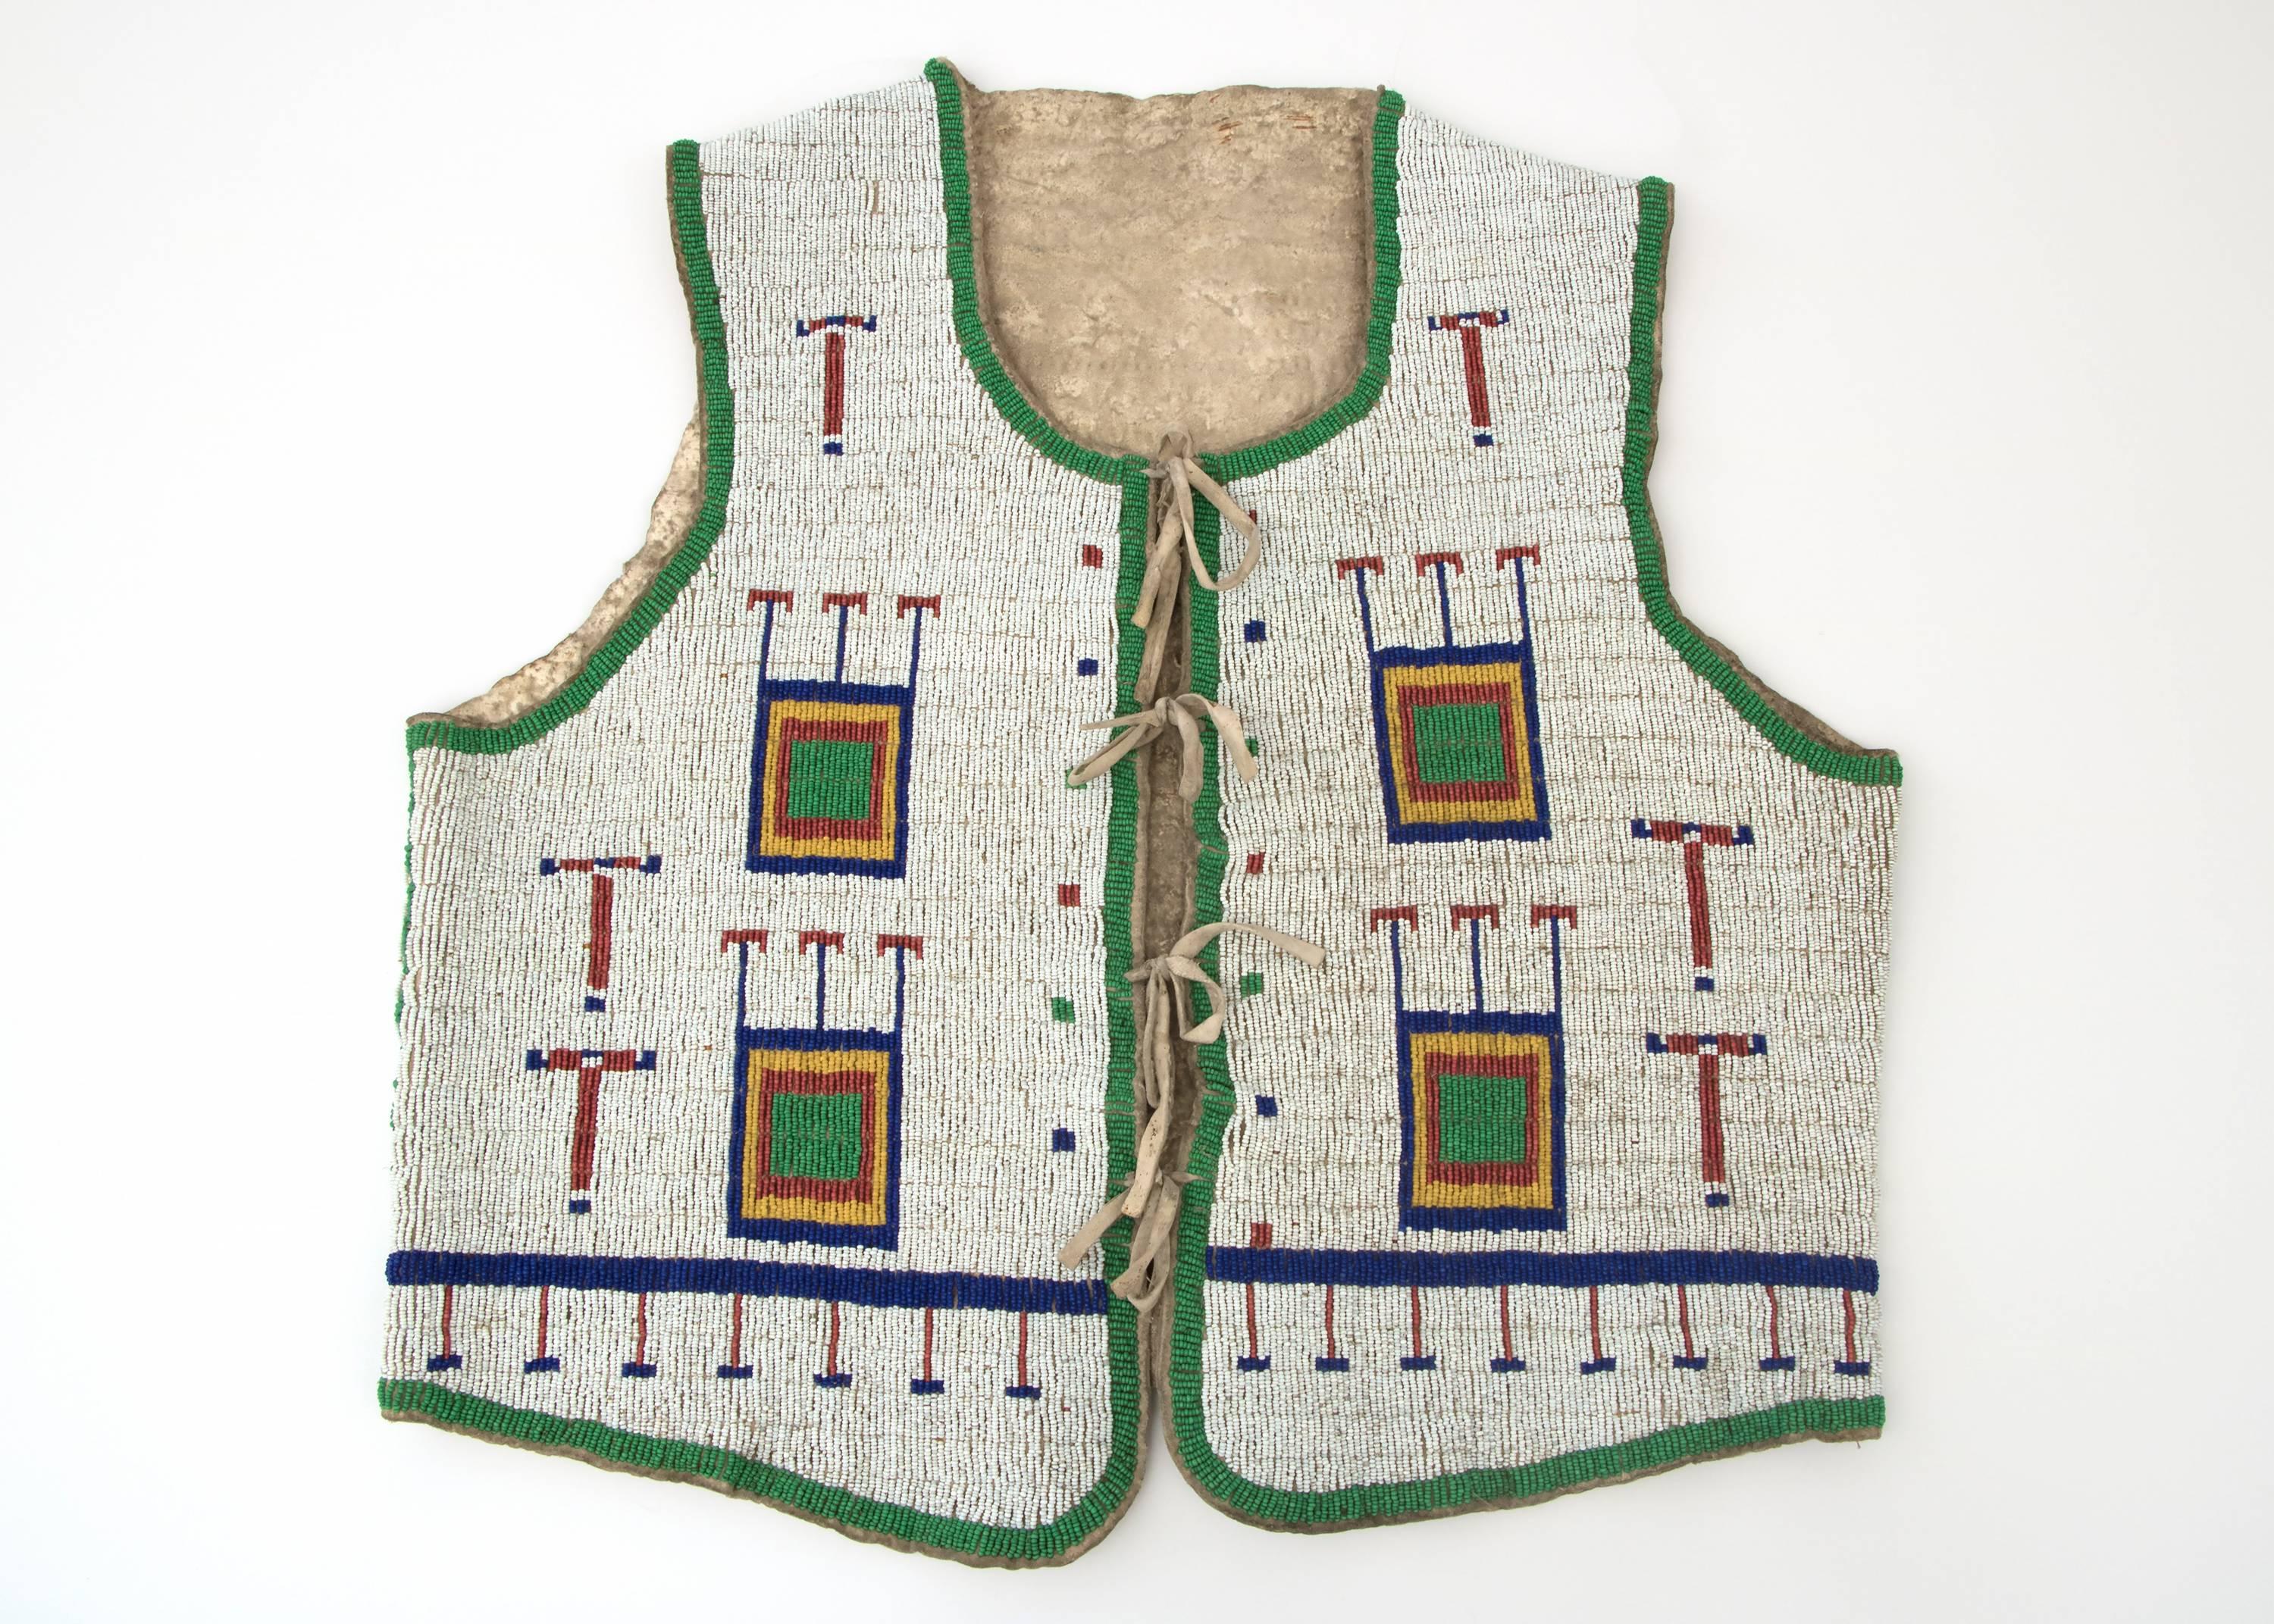 A Lakota Sioux (Plains Indian) vest constructed of native tanned hide with trade beads. Fully beaded with geometric and pictorial elements including crosses.

A Nomadic tribe, the Sioux are associated with areas of the great plains of the United